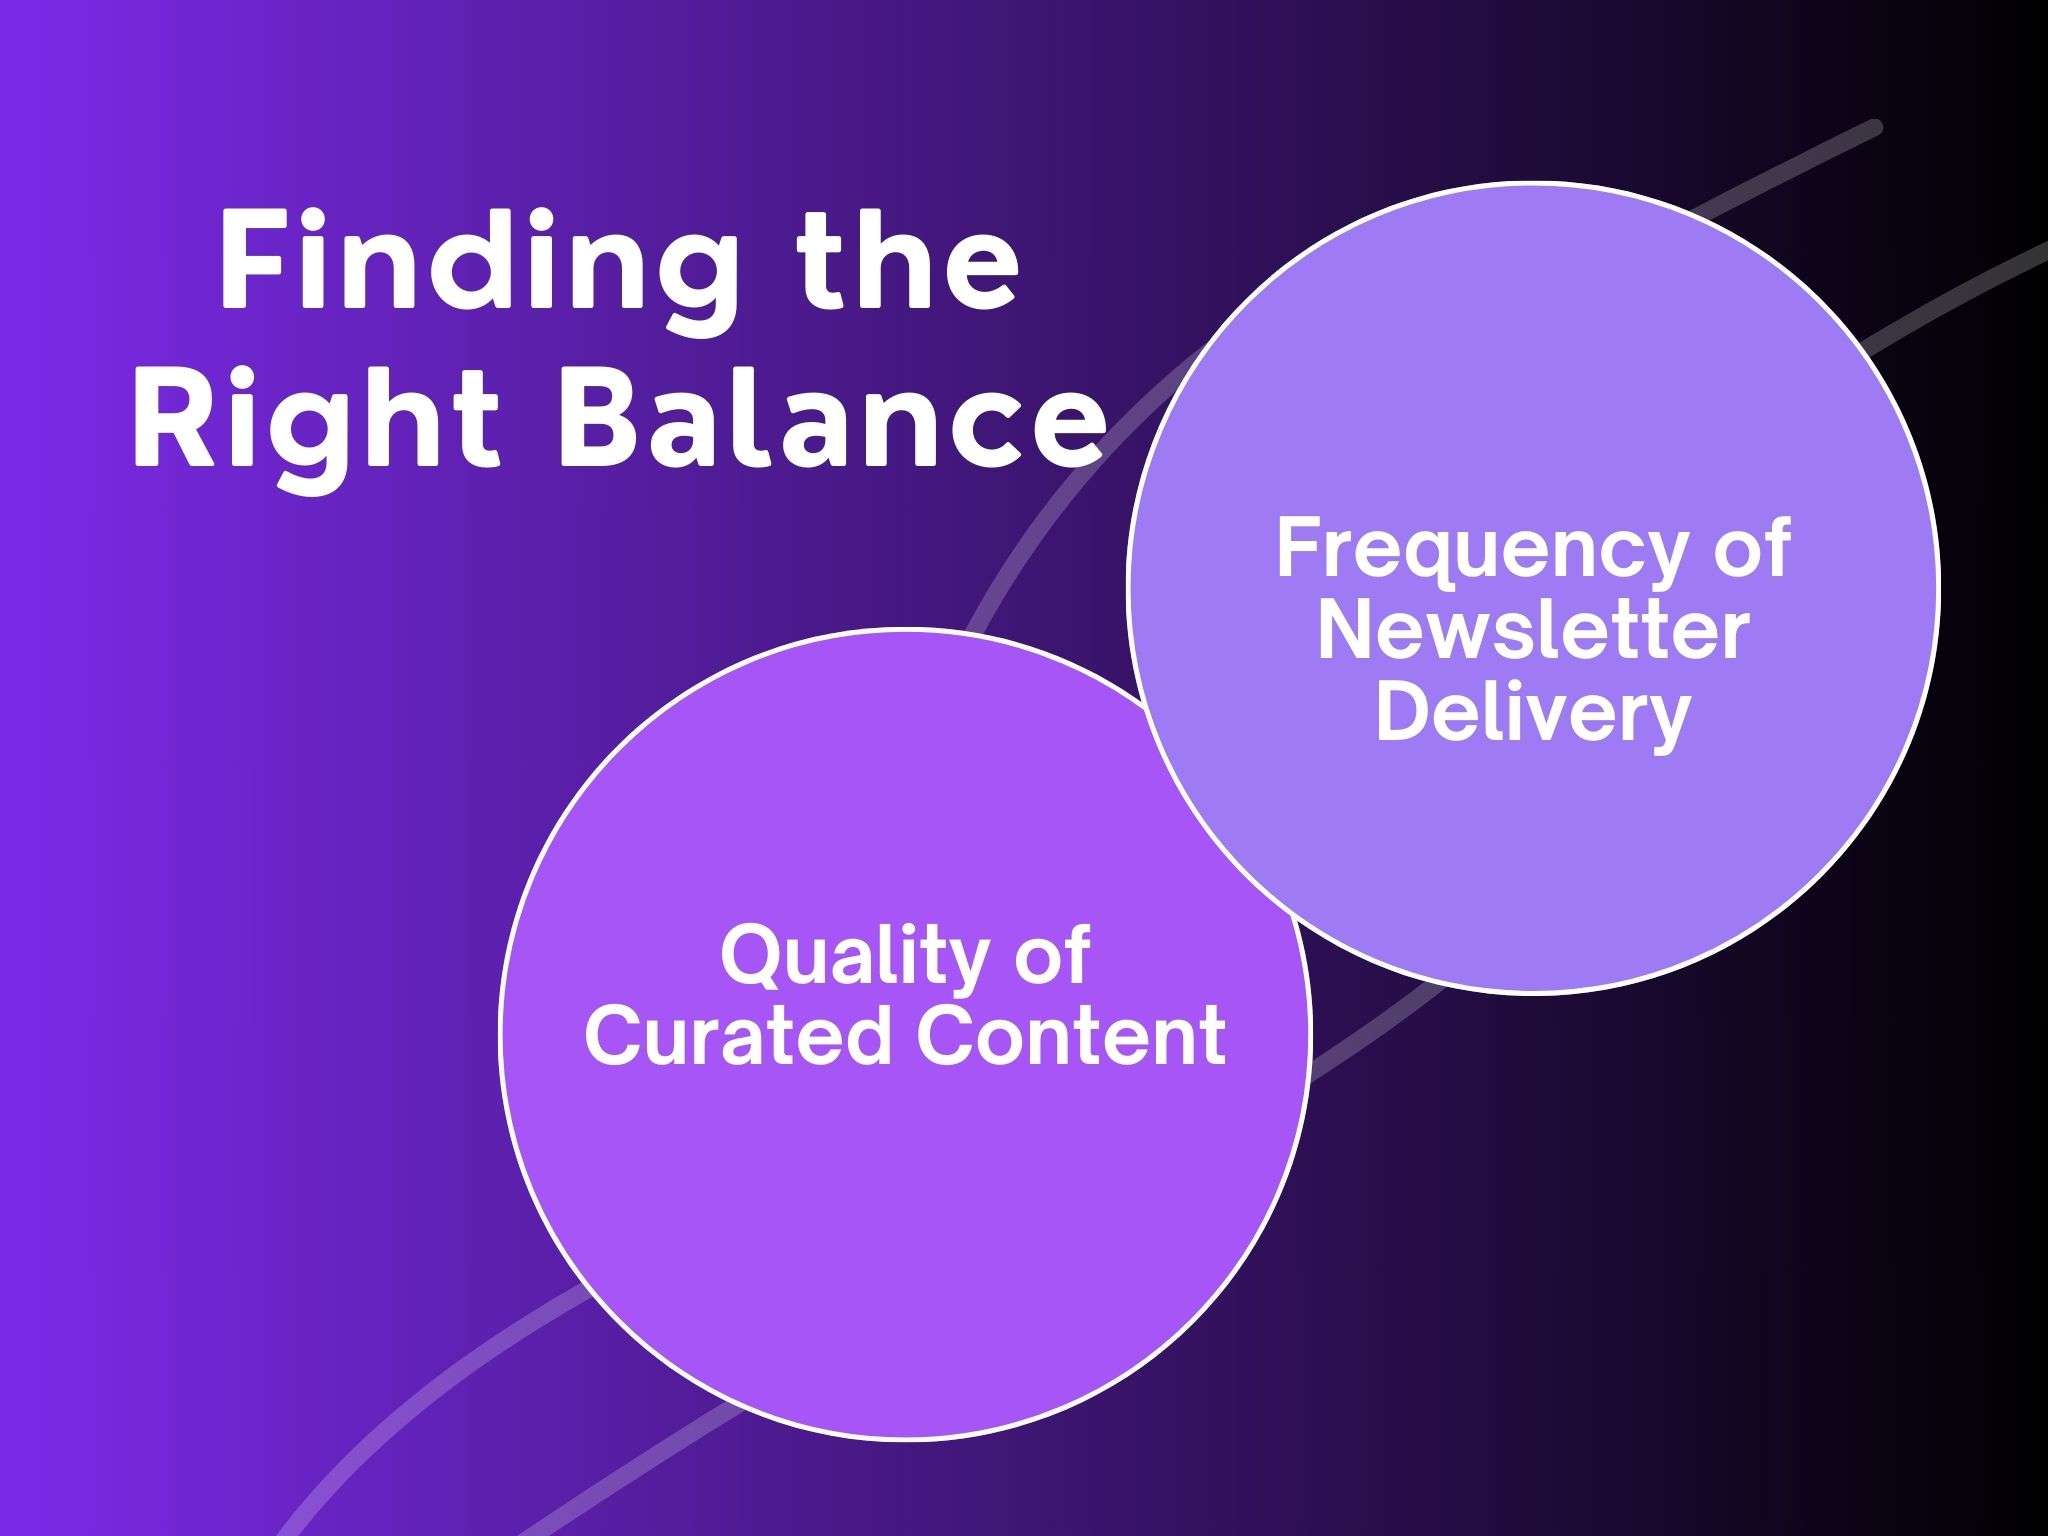 Finding the Right Balance